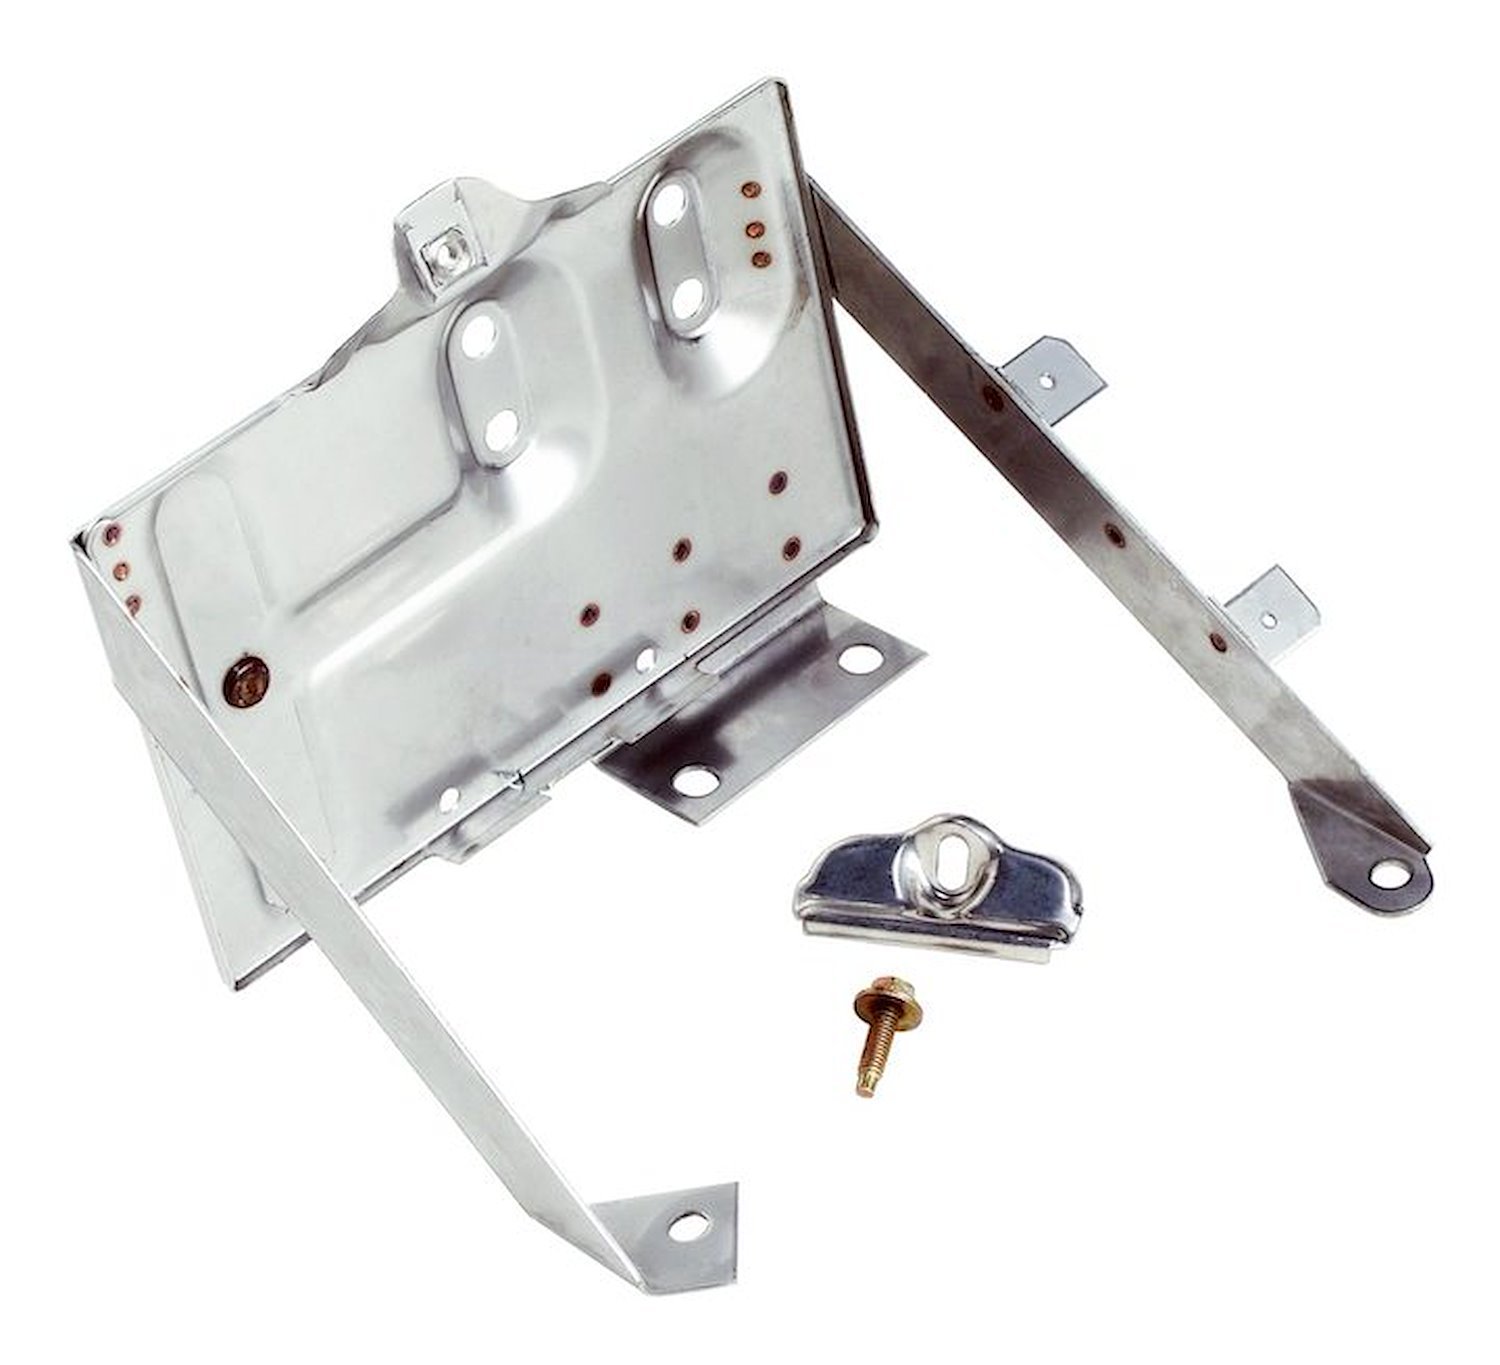 RT34020 Stainless Battery Tray 1976-1986 Jeep CJ-5, CJ-7, CJ-8; Includes Battery Tray and Clamp w/ Bolt